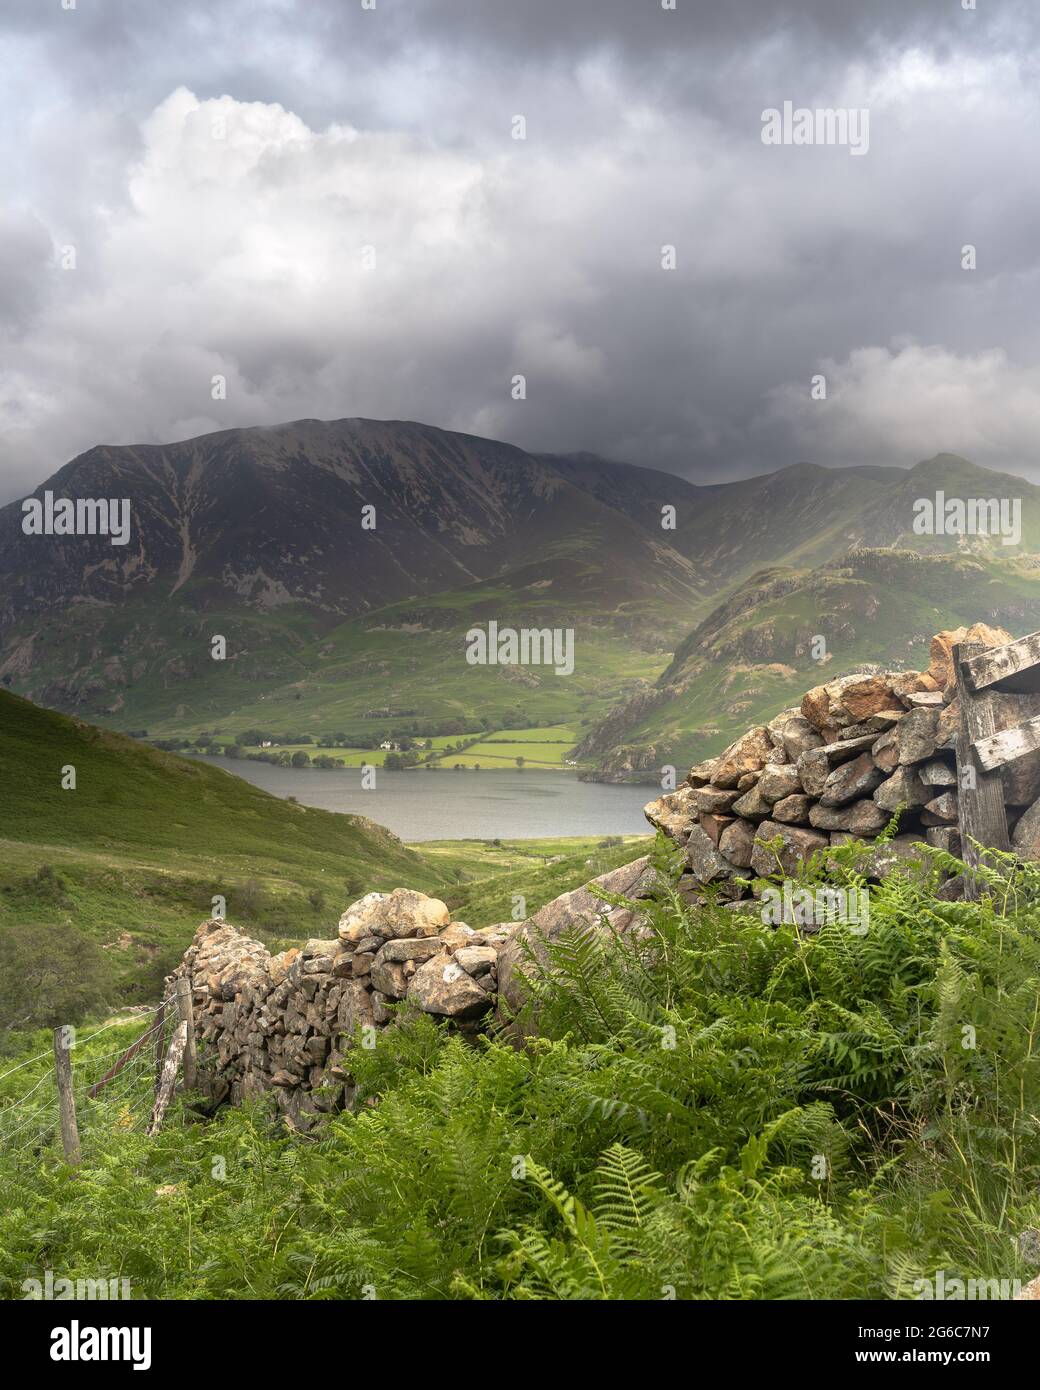 Dramatic Landscape photos from Crummock Water in the Lake District National Park UK.  This was taken on the path up Scale Fell heading towards Scale F Stock Photo